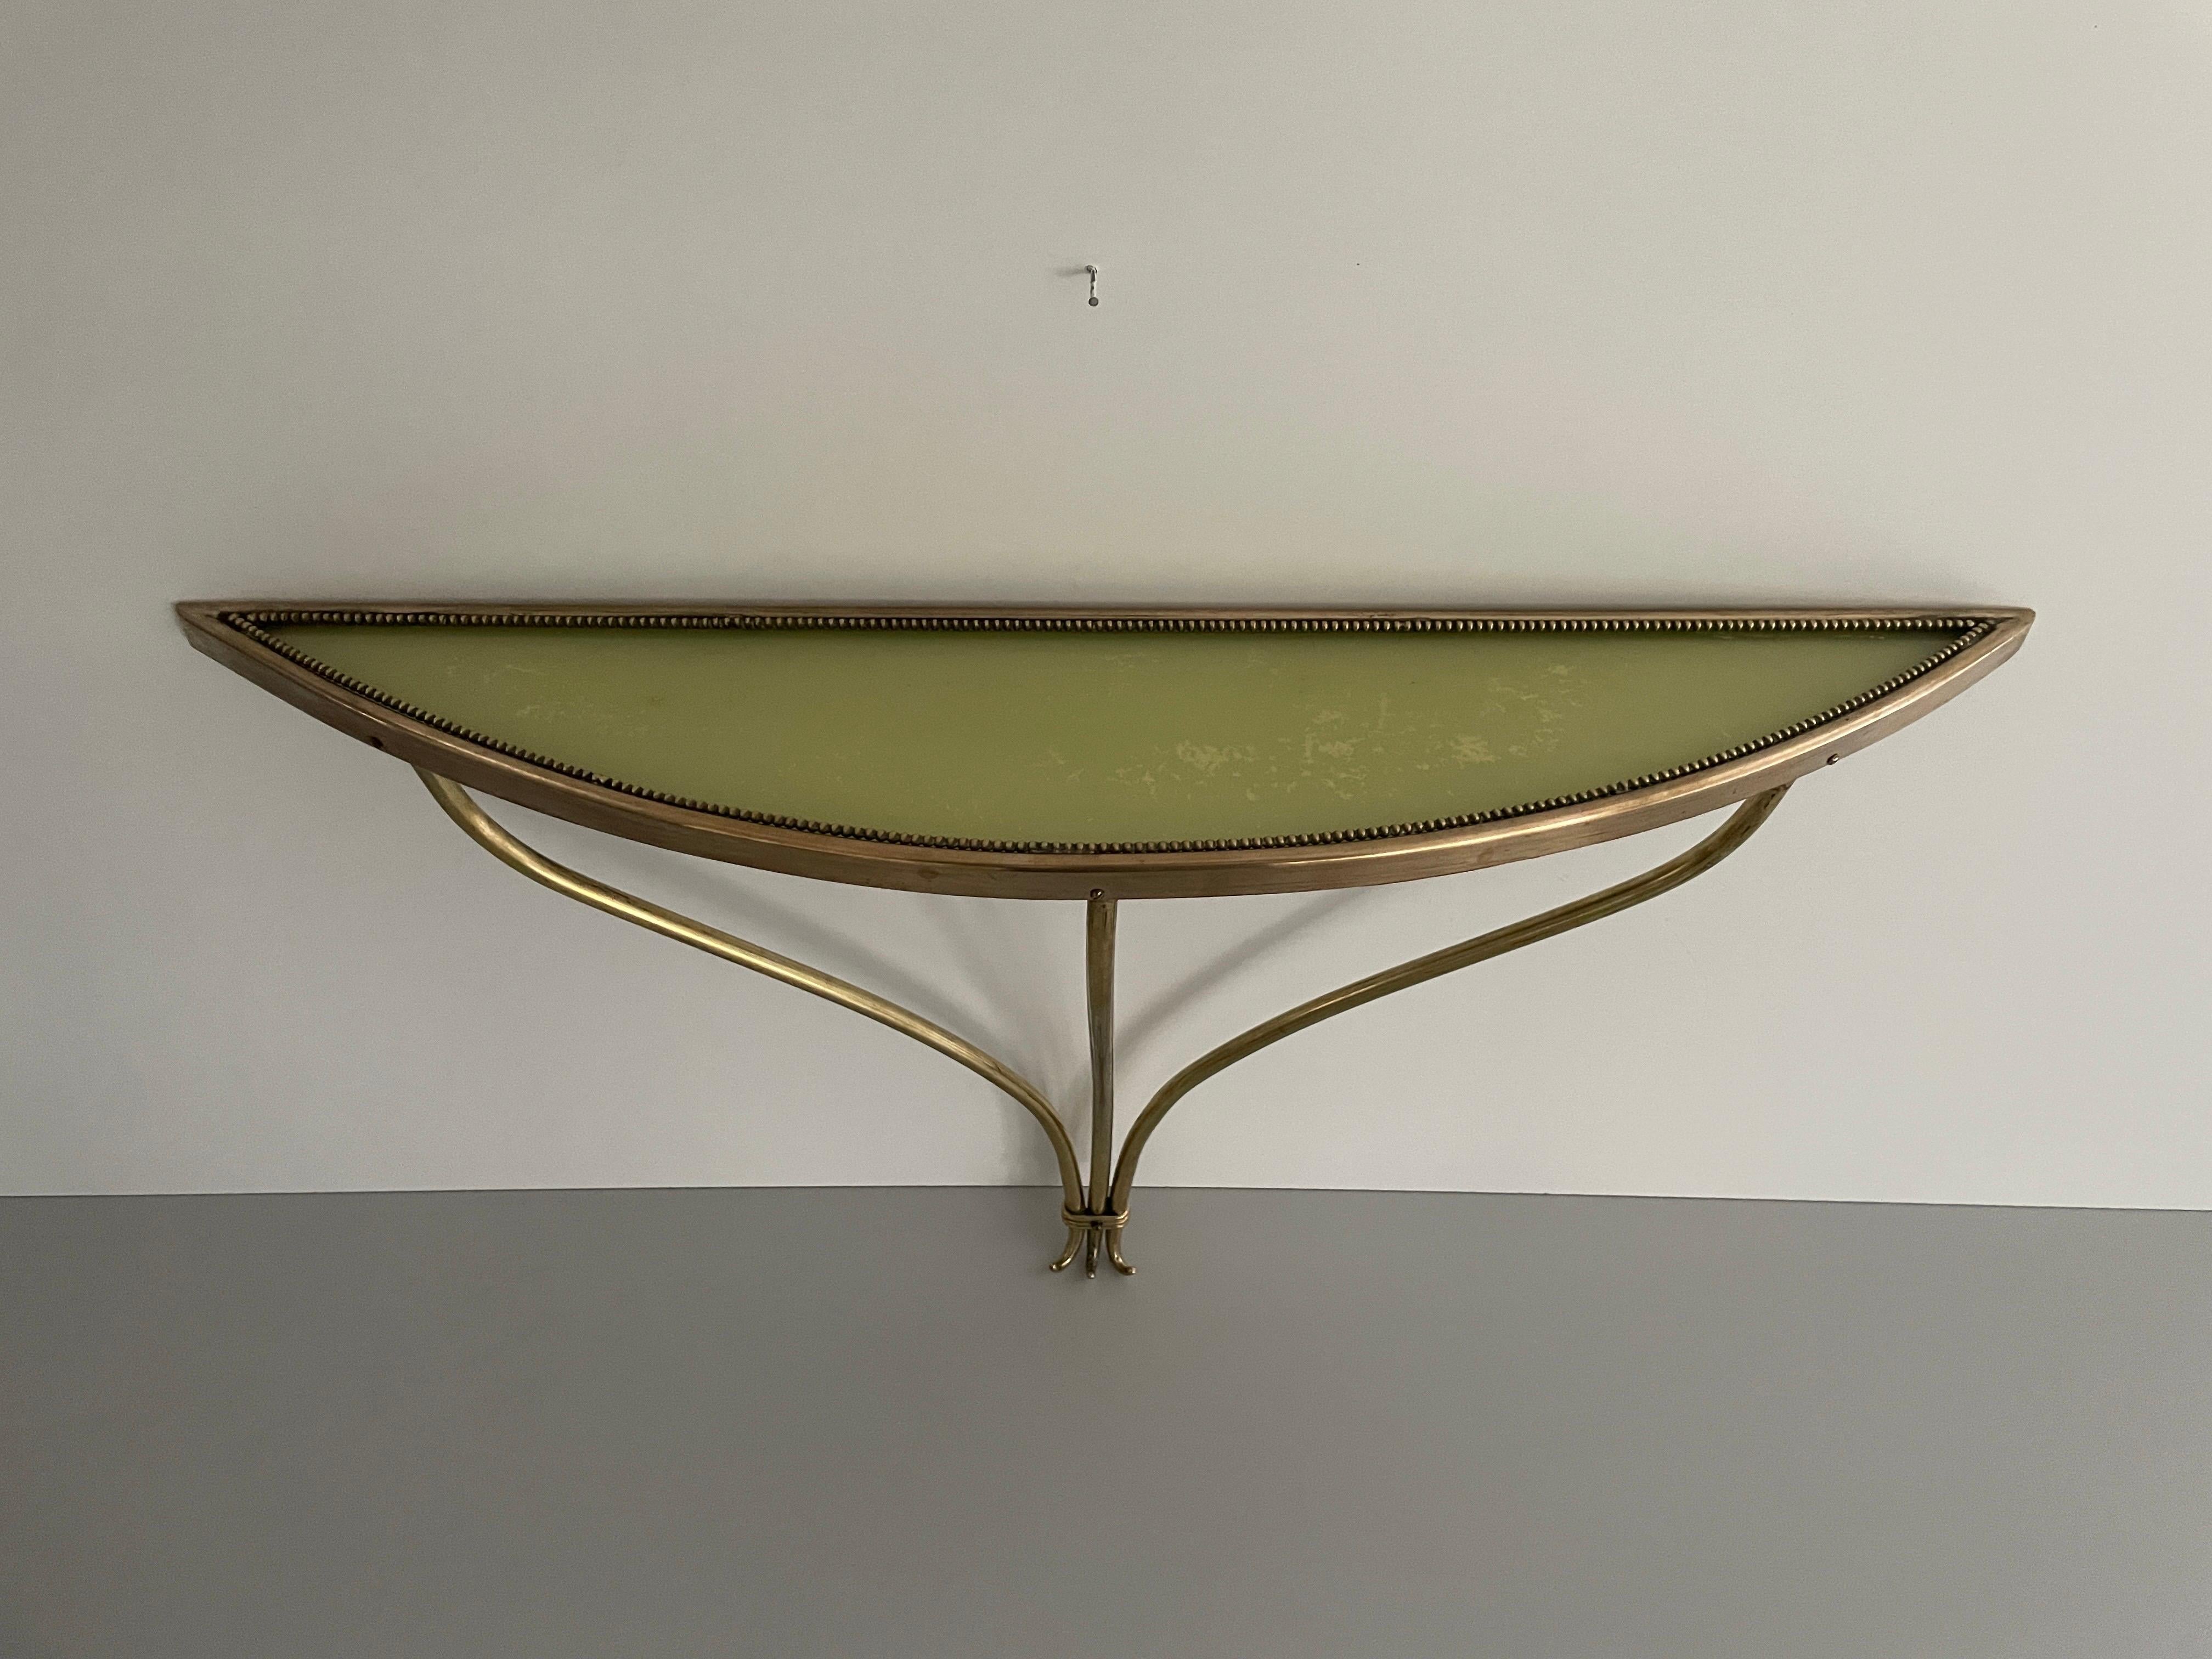 Brass Frame and Green Glass Top Floating Wall Console Table,  1960s, Italy

No damage, no crack.
Wear consistent with age and use.

Measurements: 
Height: 43 cm
Shelf: 65 cm x 13 cm x 2 cm